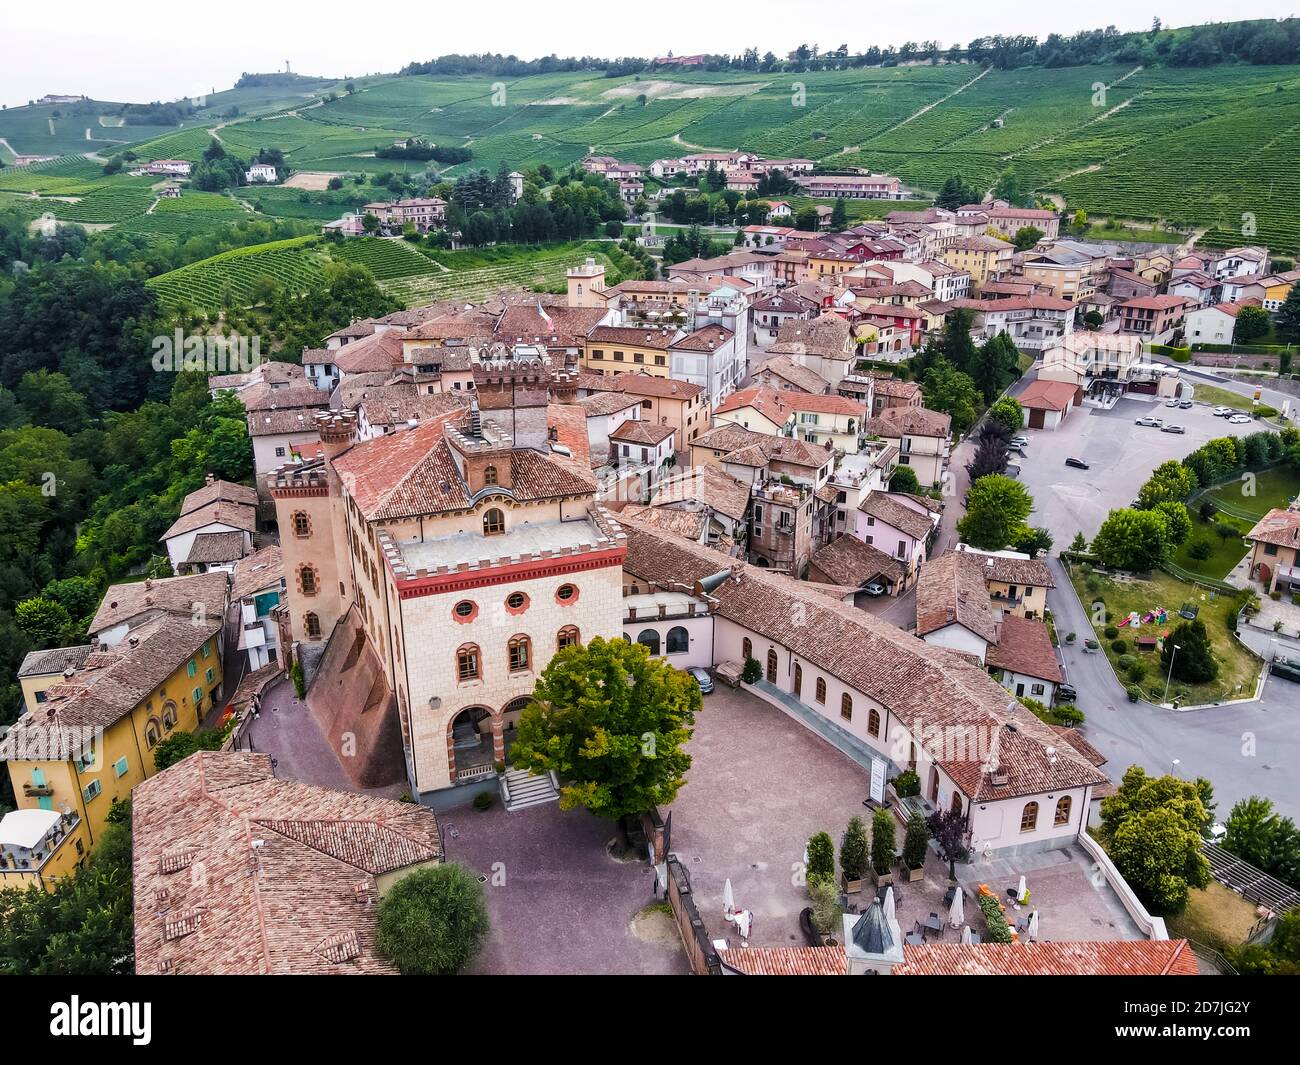 Drone view of old rural town Stock Photo